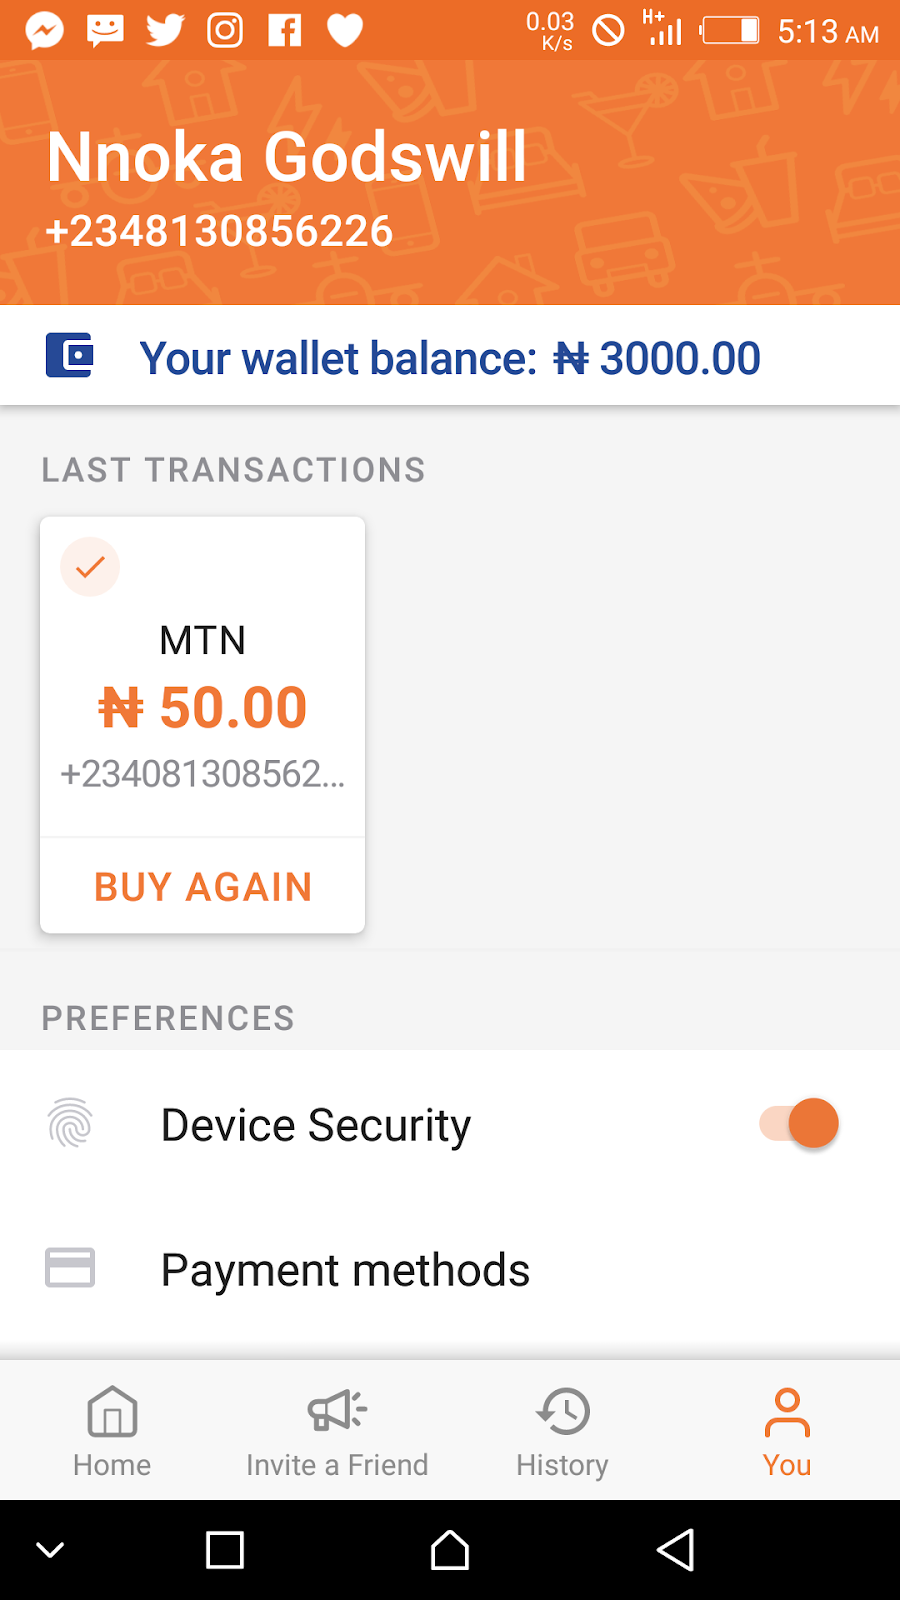 How to Get Free N500 Airtime On any network